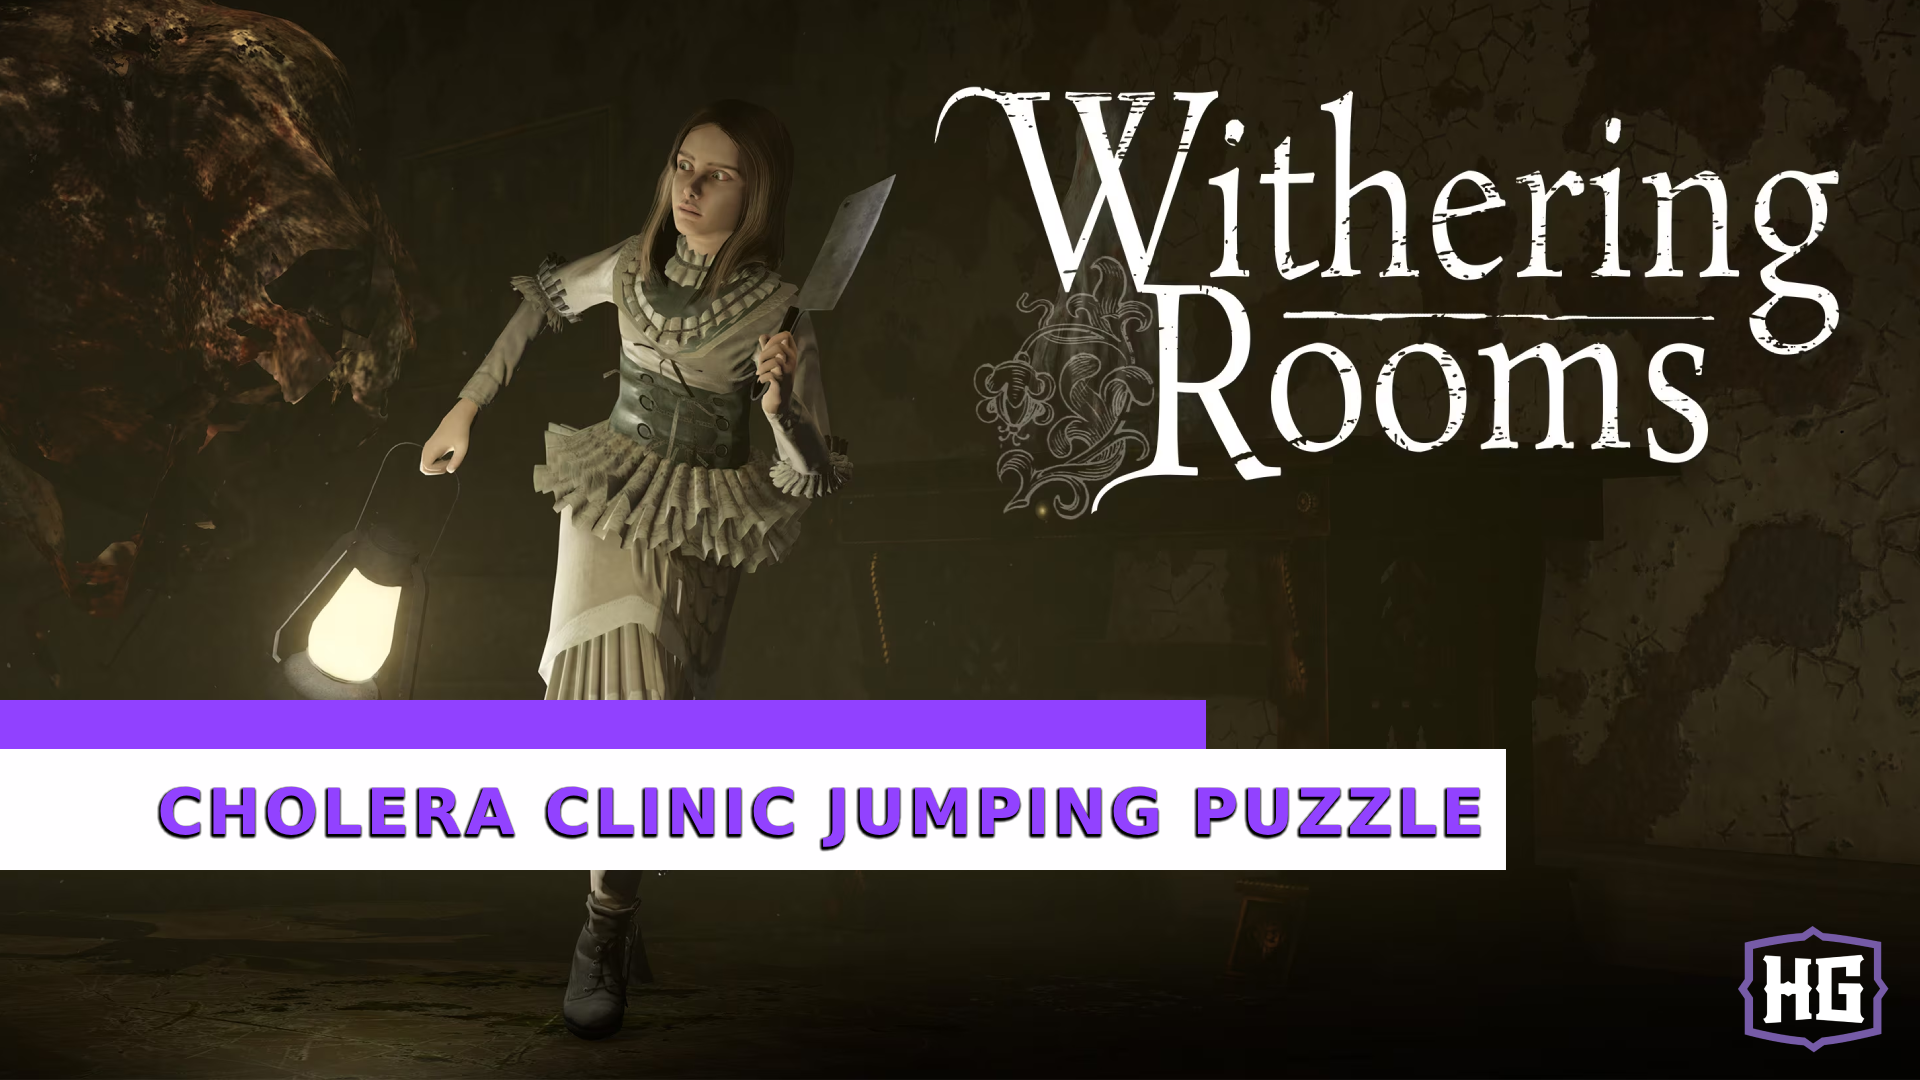 cholera clinic jumping puzzle withering rooms